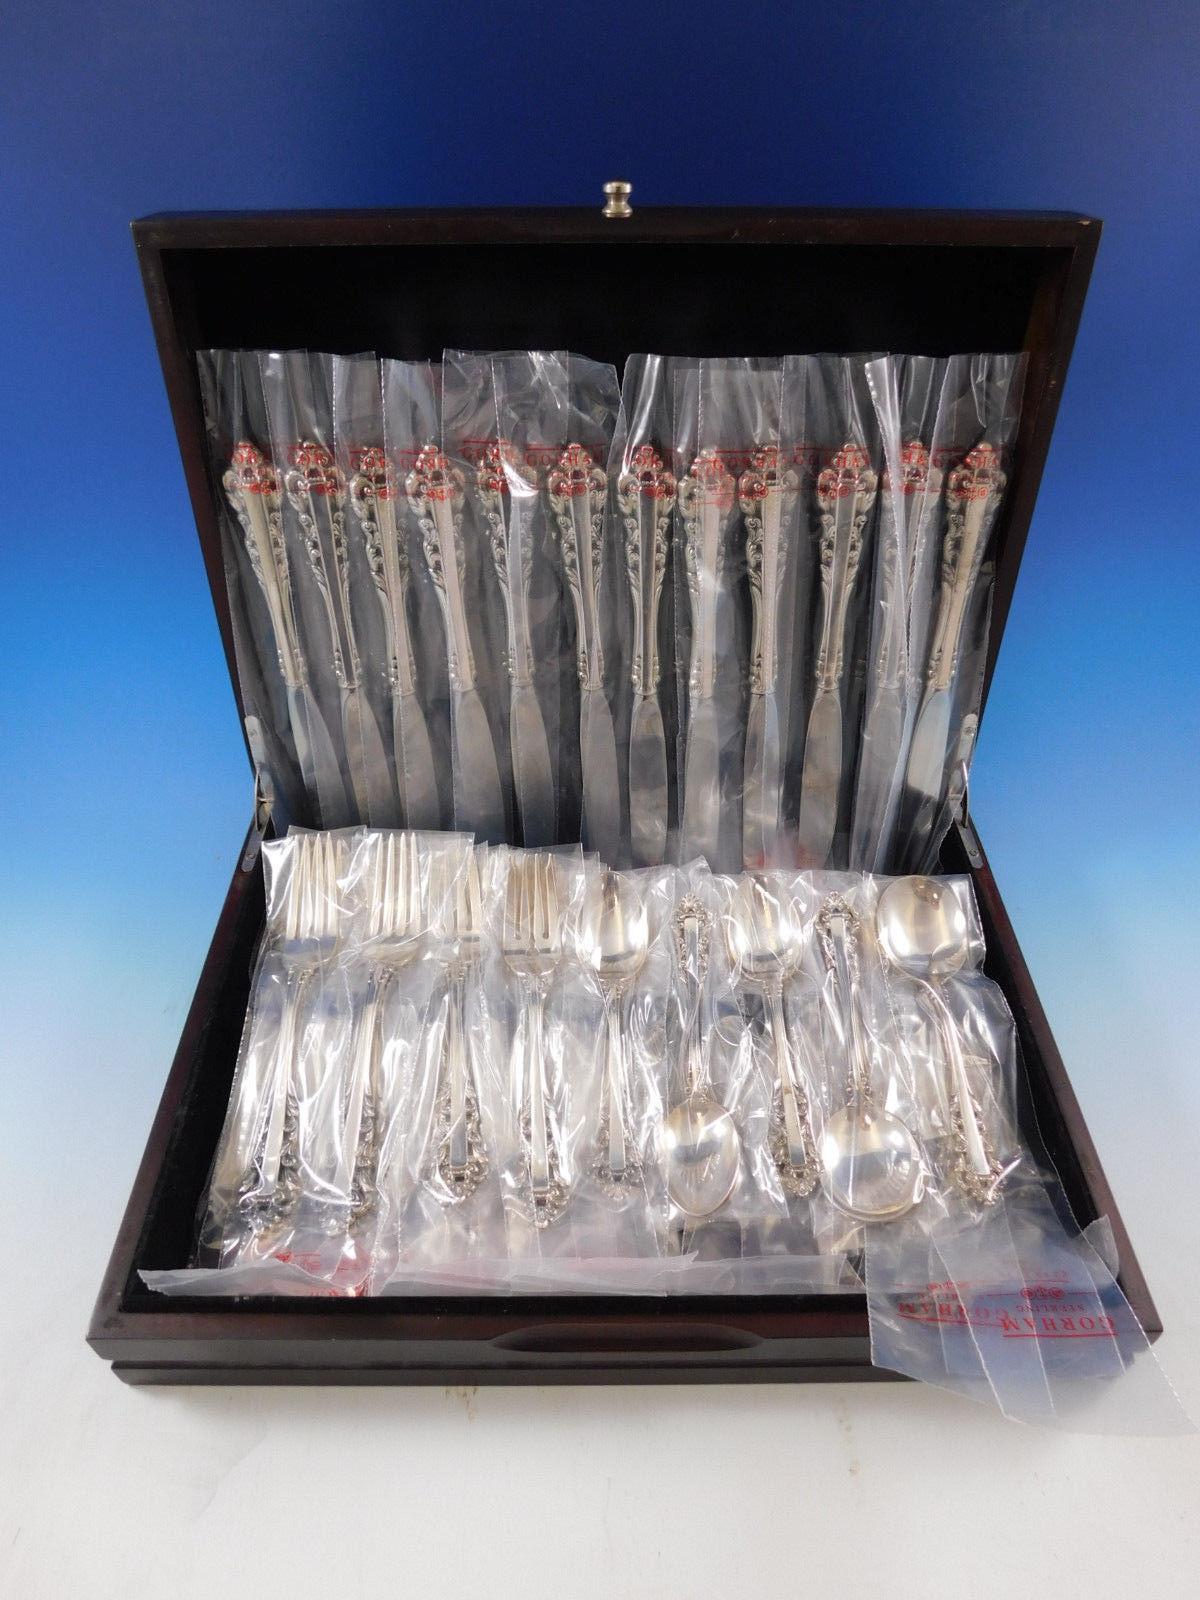 Unused Medici (1971) by Gorham sterling silver flatware set, new in factory sleeves - 60 pieces. This set includes:

12 place knives, 9 1/8